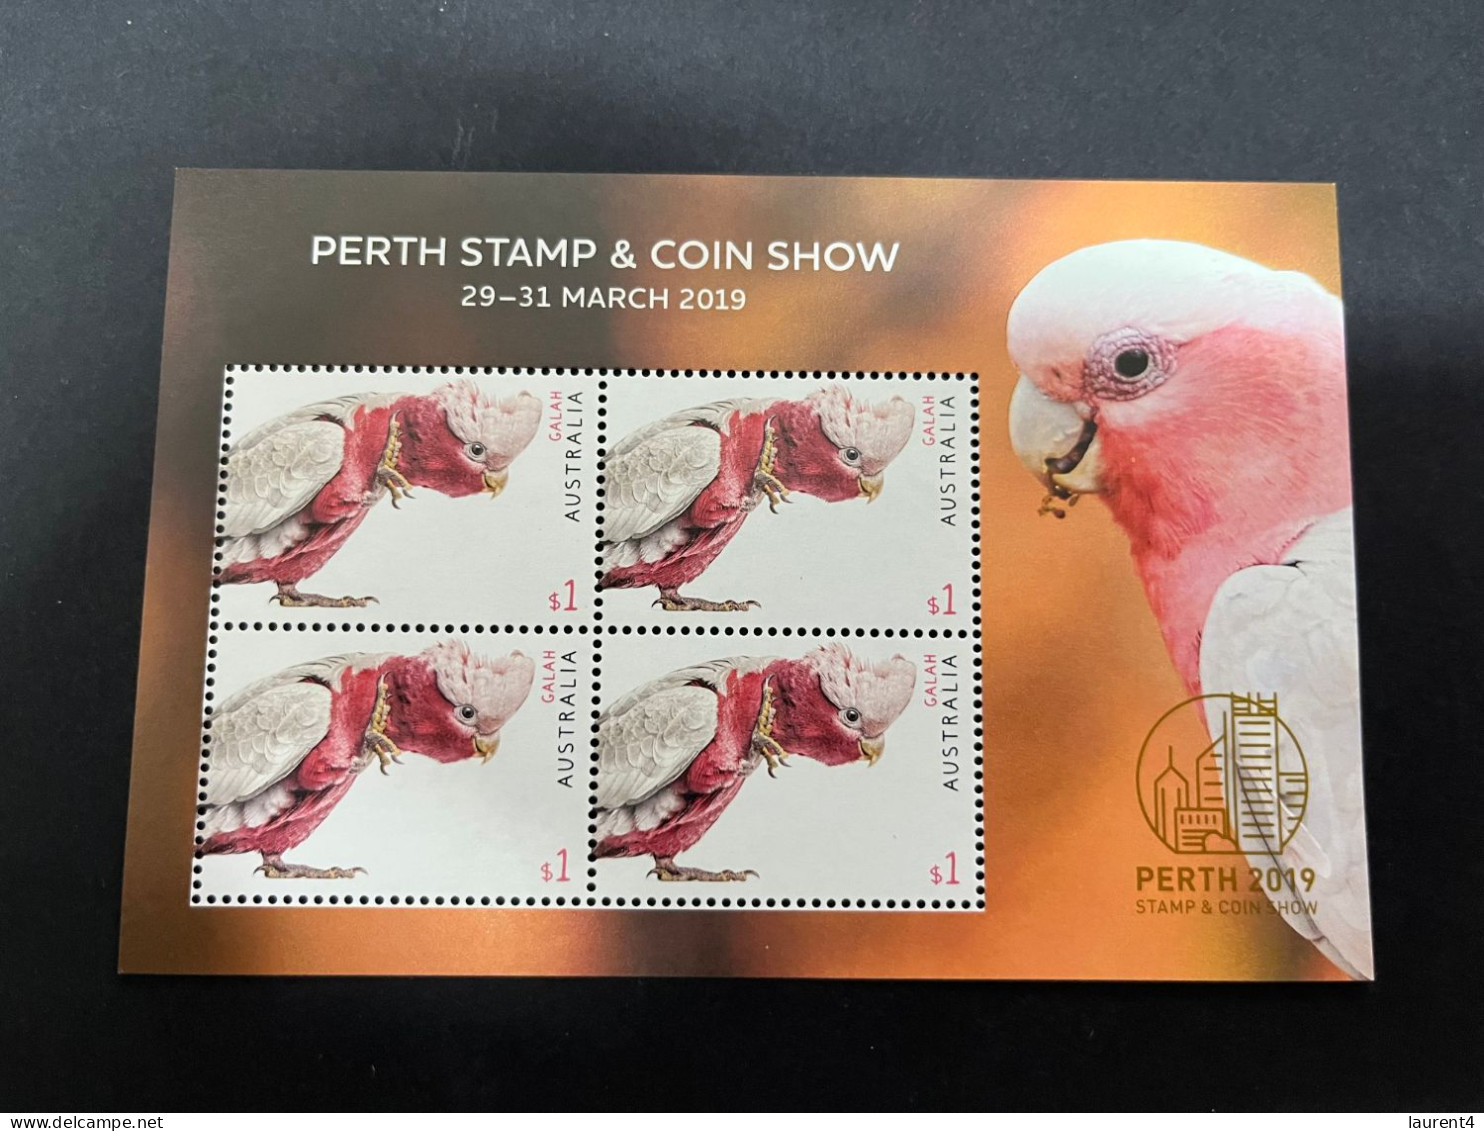 8-1-2024 (stamp) 1 Bloc Of 4 Stamps (mint) Australia - Perth Stamp & COin Show 2019 (Galah Bird) - Mint Stamps